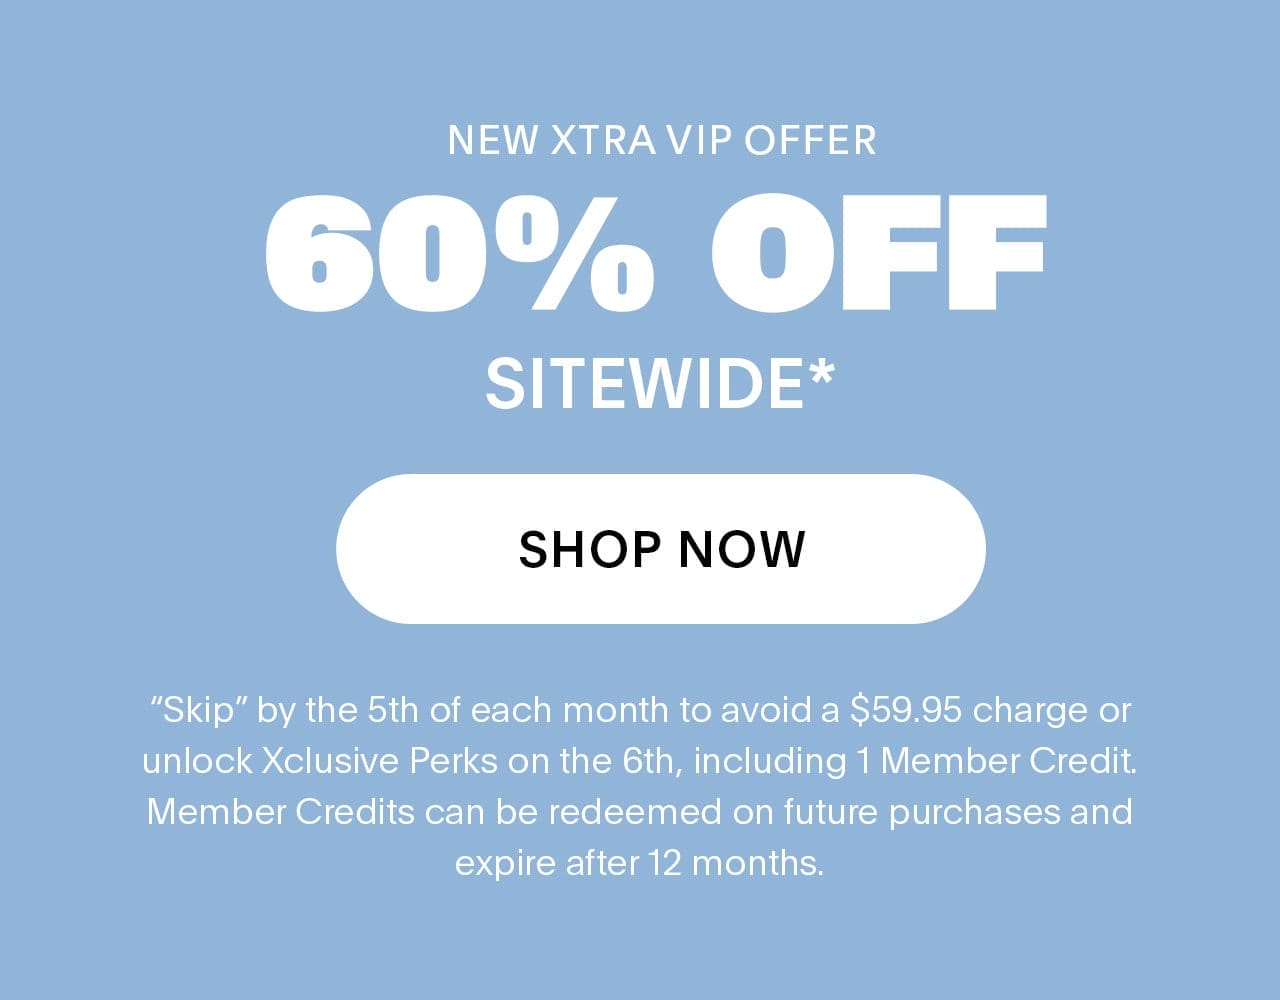 New Xtra VIP Offer 60% OFF Sitewide* 